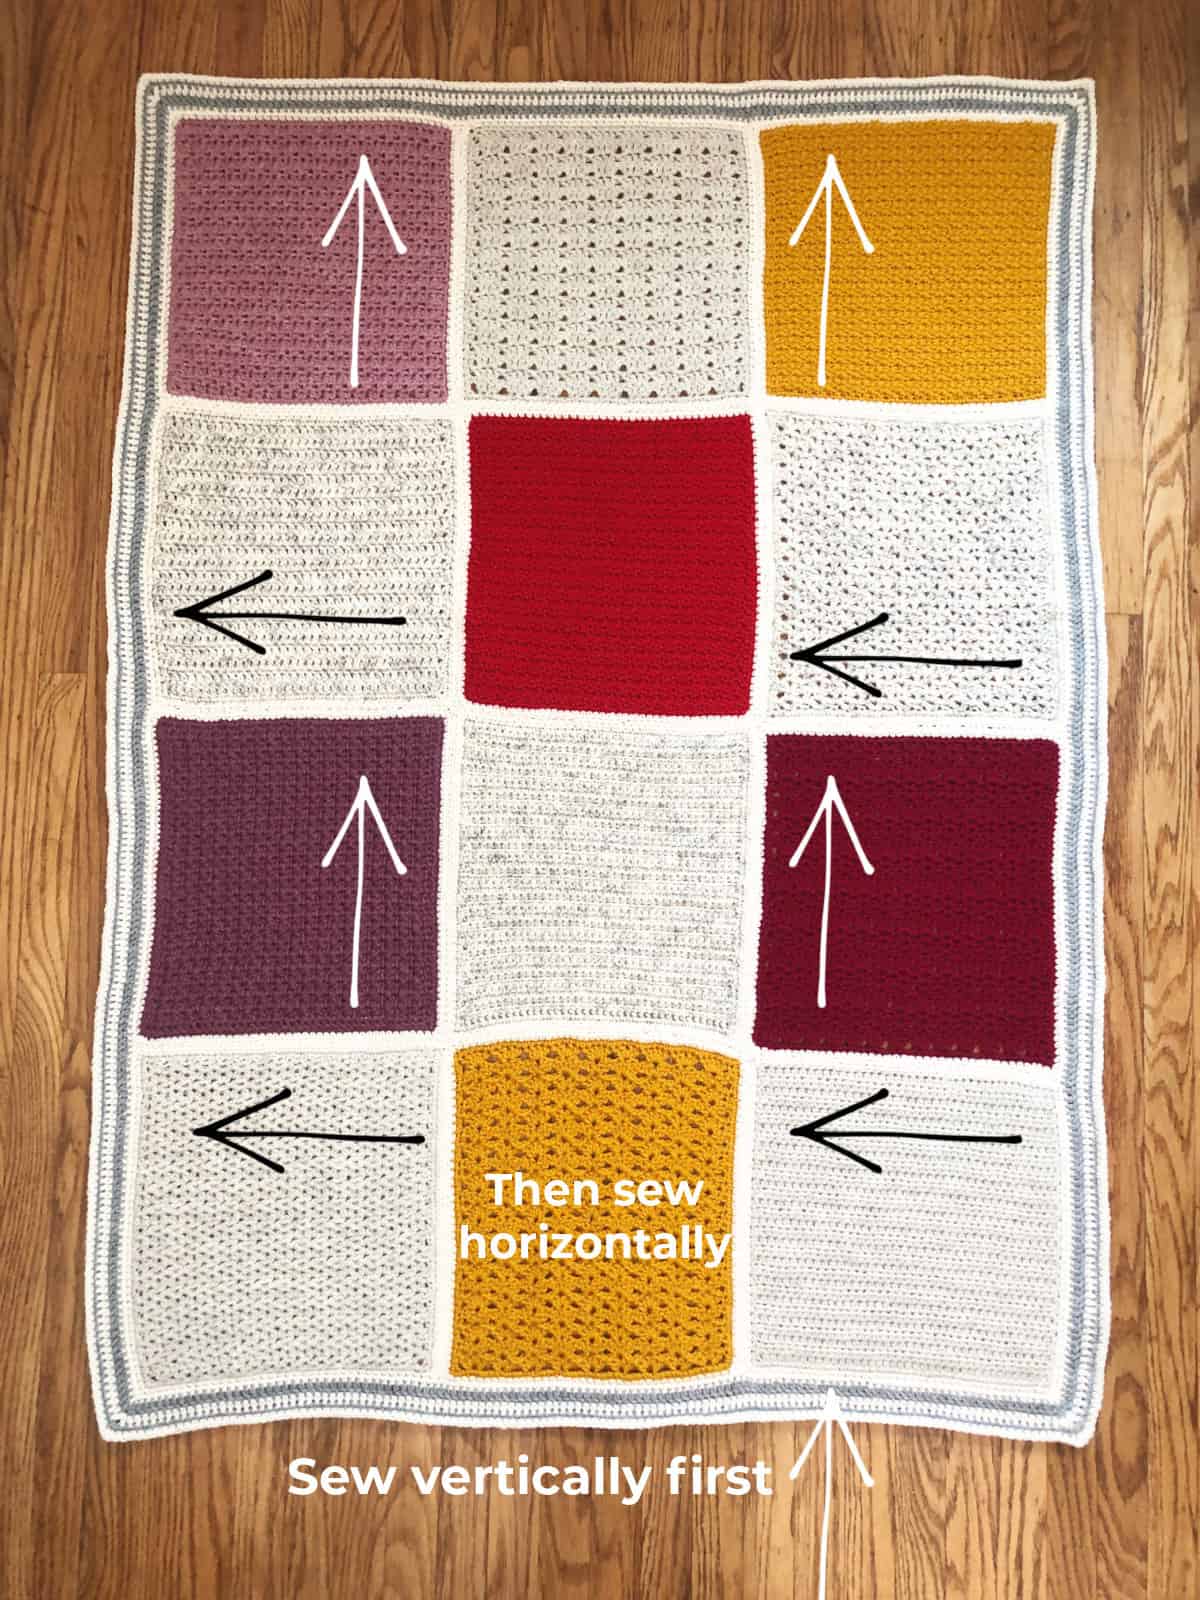 Patchwork blanket with arrows indicating direction of joining.